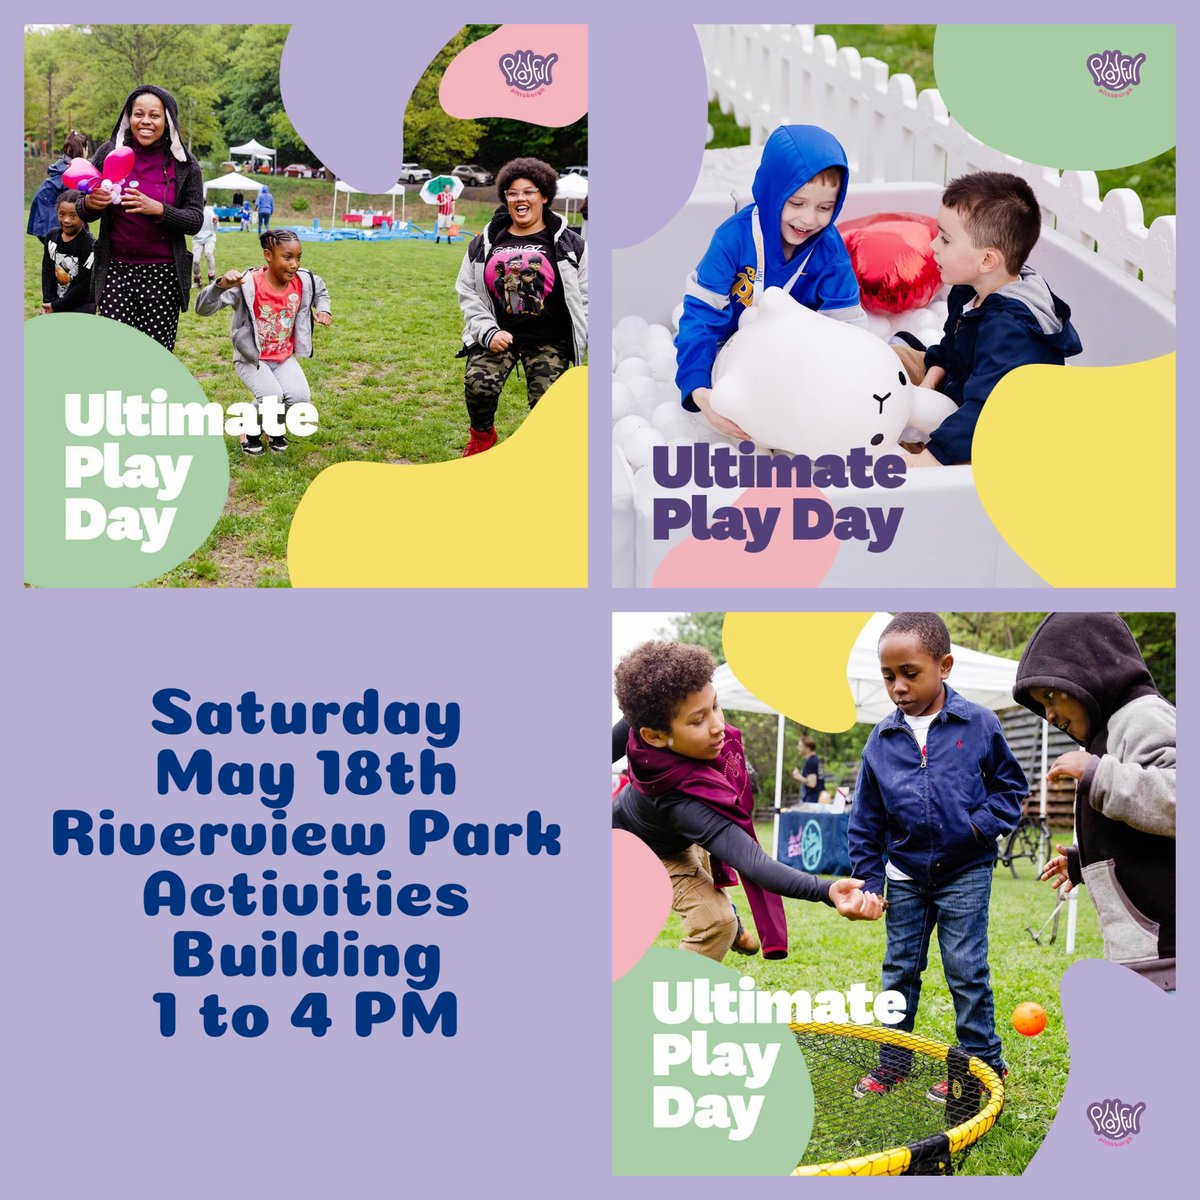 Let’s PLAY @Pittsburgh!  ULTIMATE PLAY DAY is TOMORROW!

Riverview Park Activities Building
Saturday, May 18th from 1 to 4 PM
Register HERE: ow.ly/13BX50Rcmuq

We can’t wait to play!!

@Trying_Together @remakelearning @radworkshere